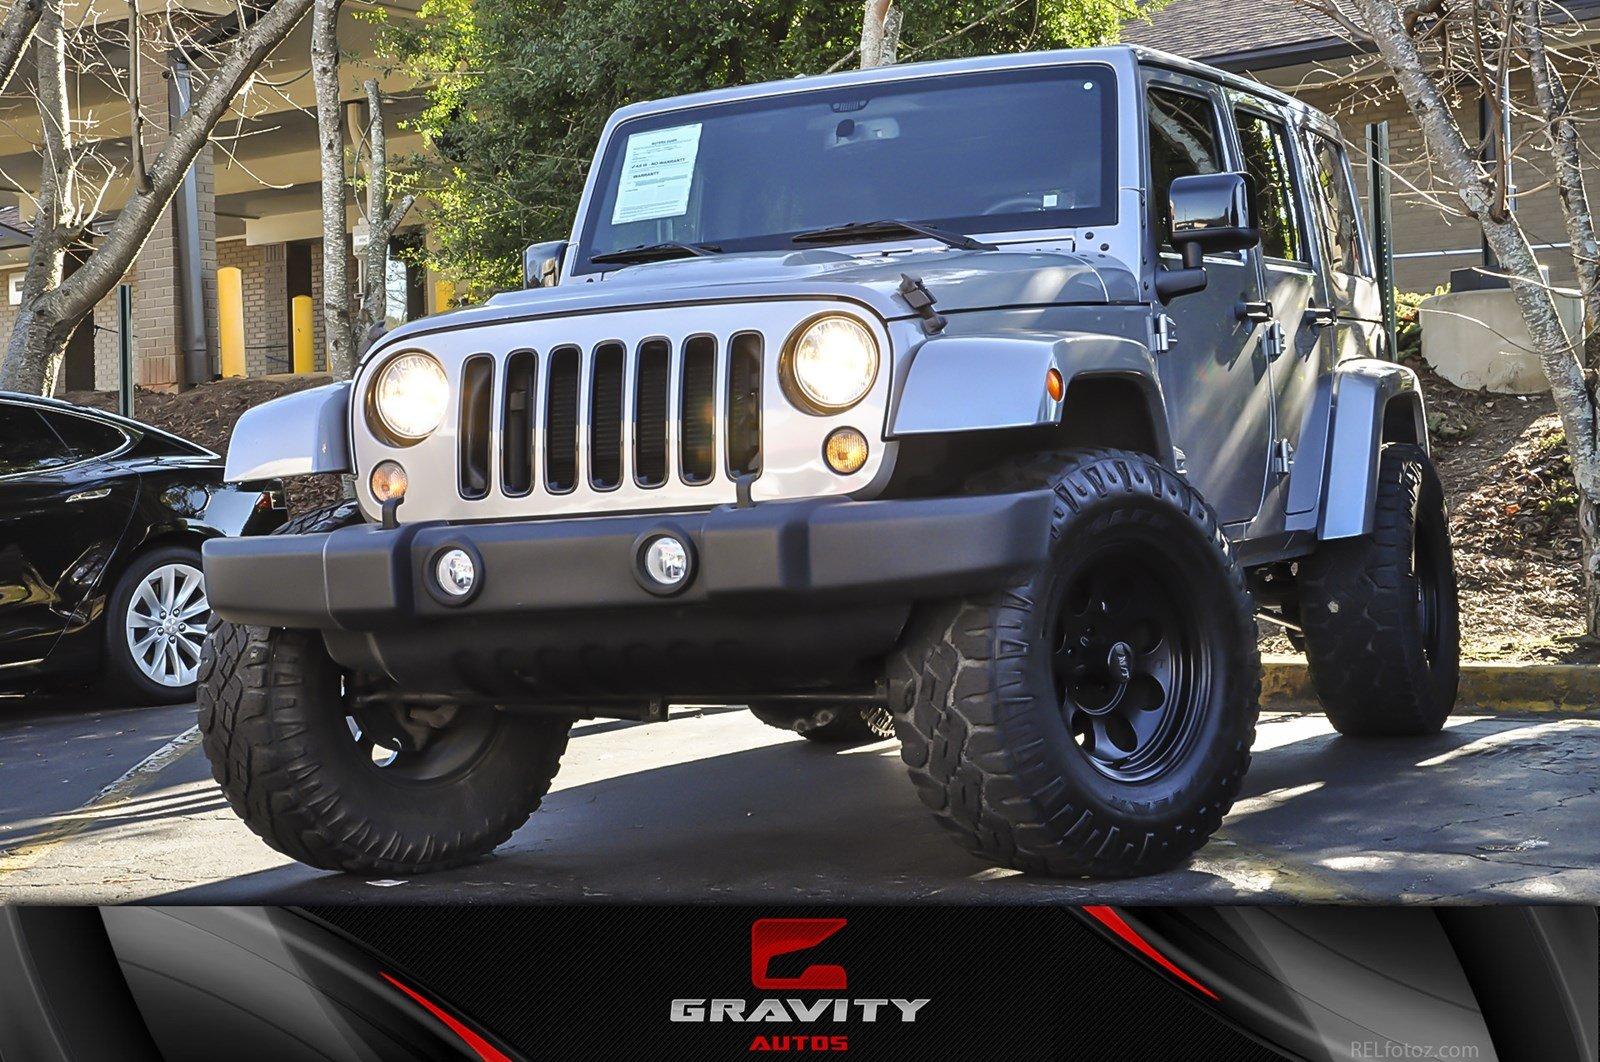 Used 2015 Jeep Wrangler Unlimited Wrangler Unlimited Altitude For Sale  ($29,795) | Gravity Autos Atlanta Stock #718336